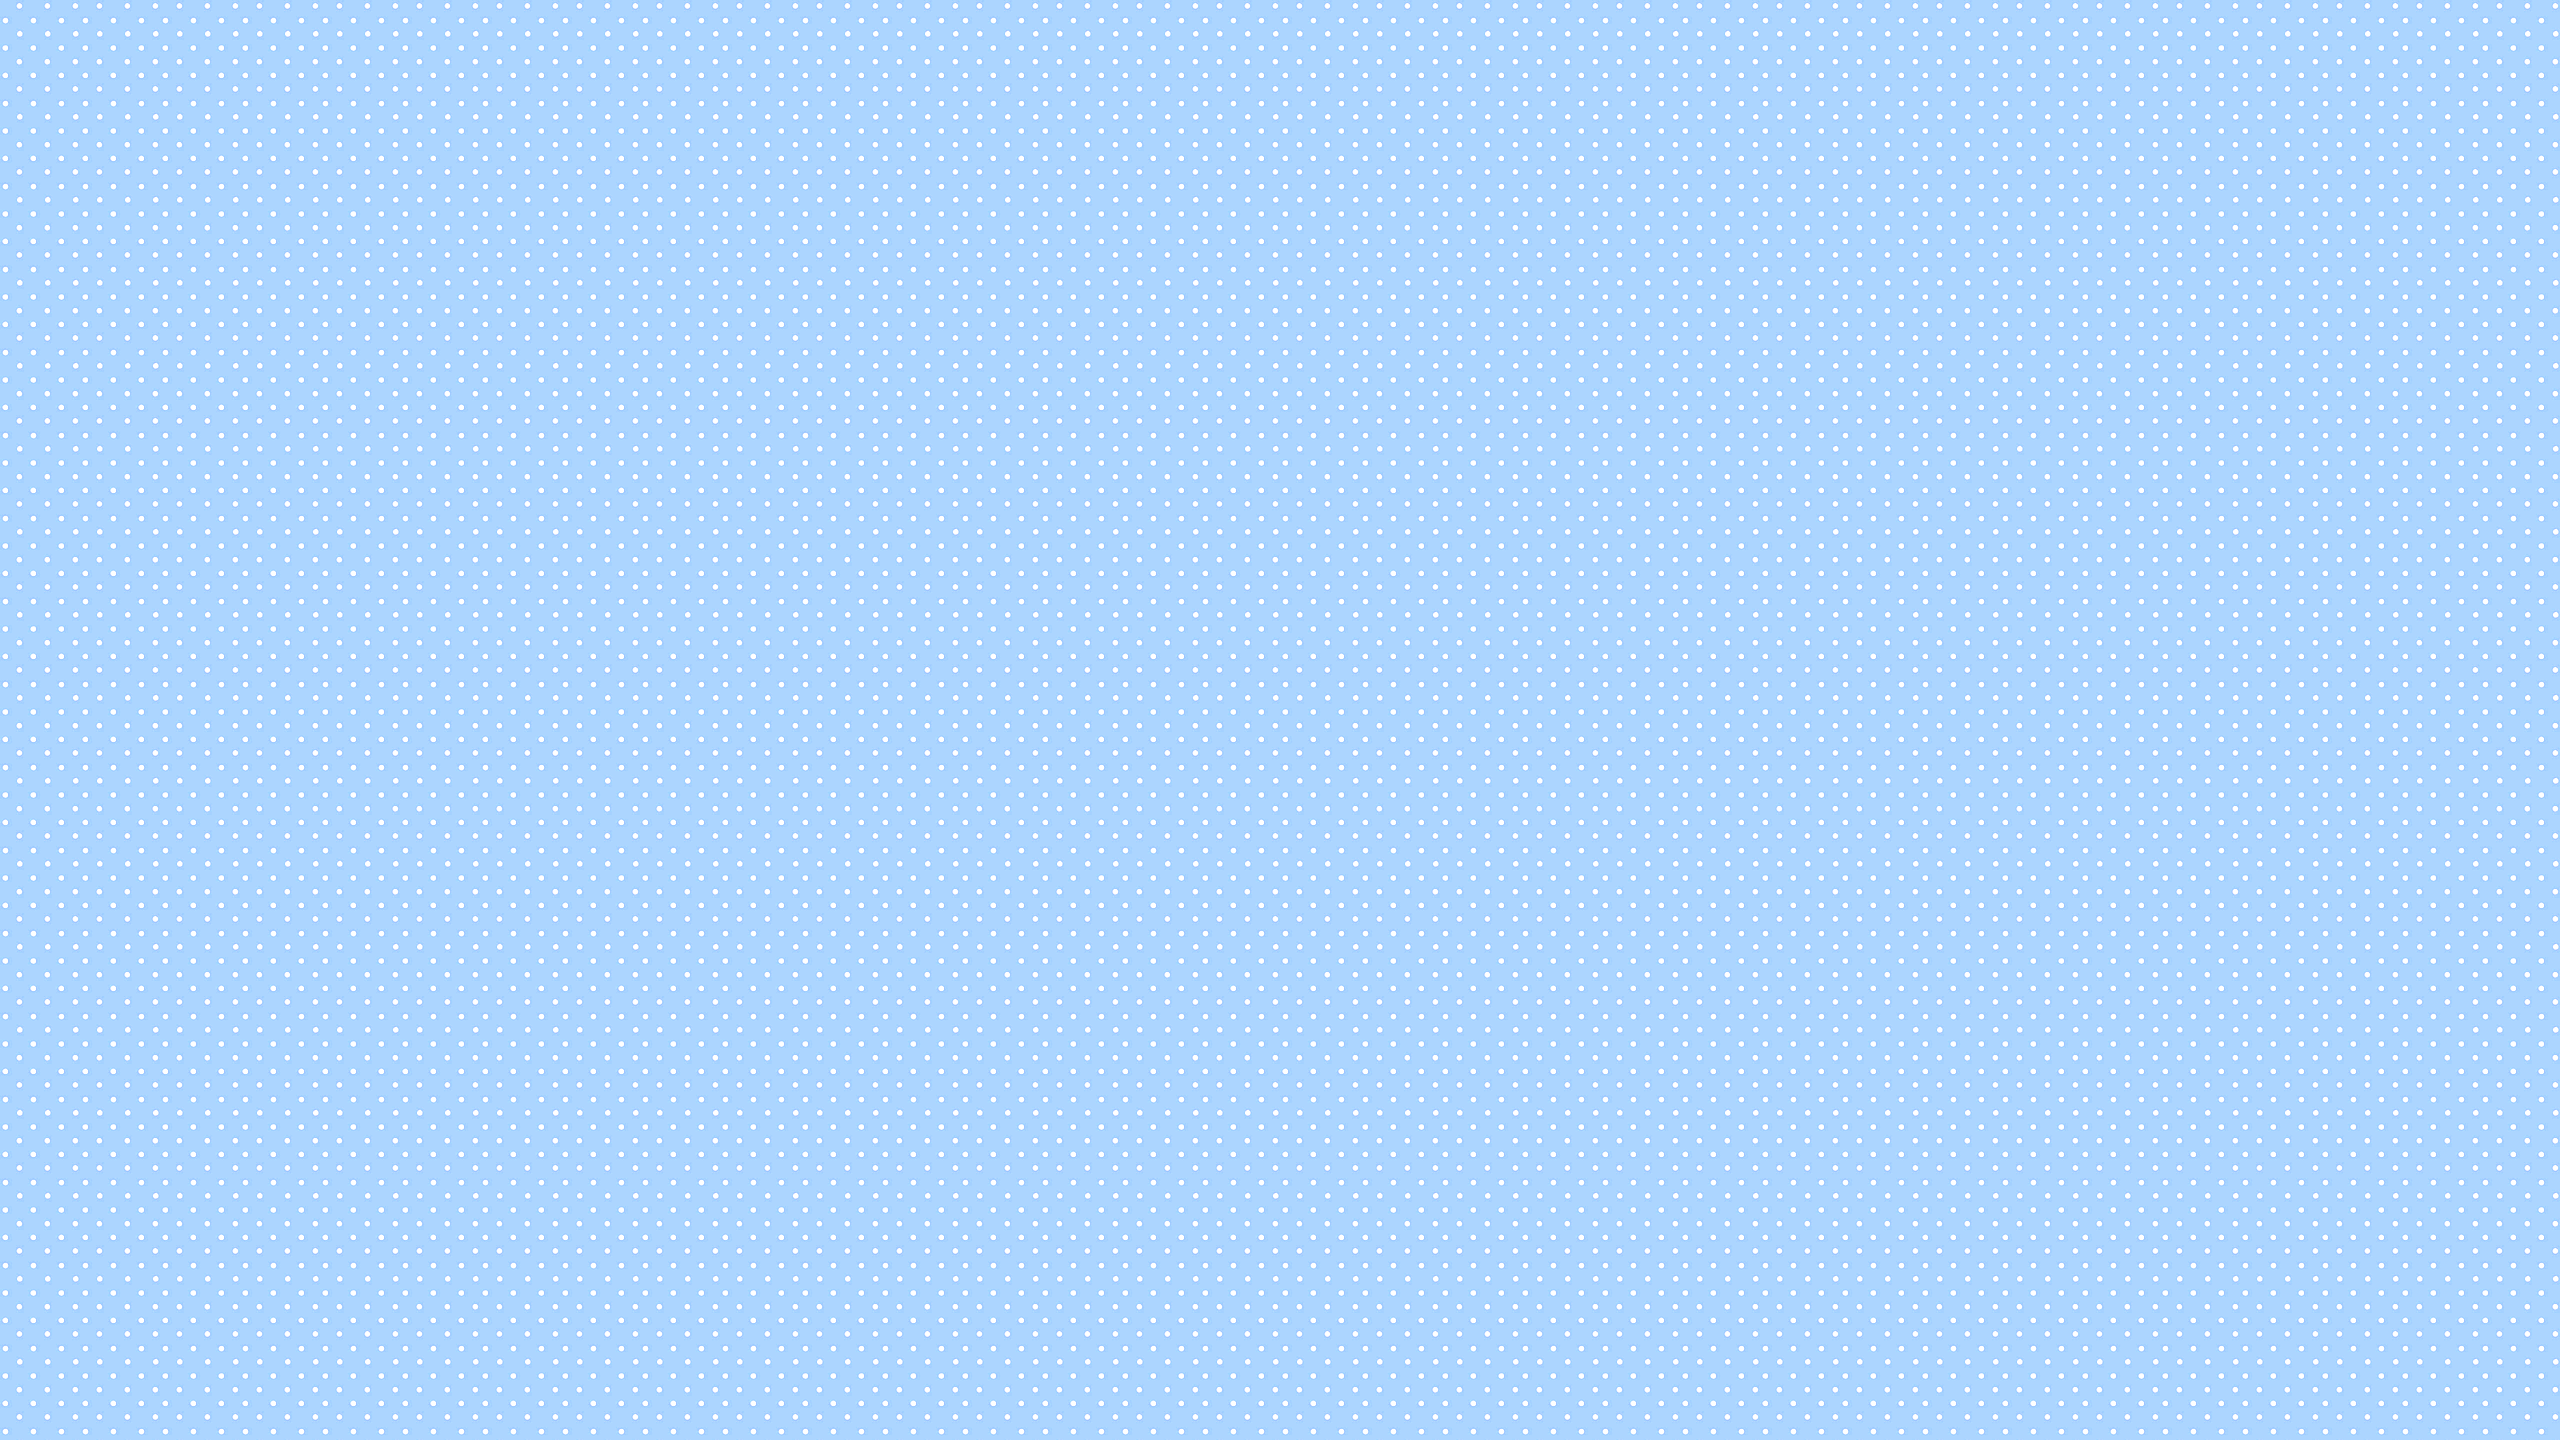 A blue background with a pattern of white dots - Pastel blue